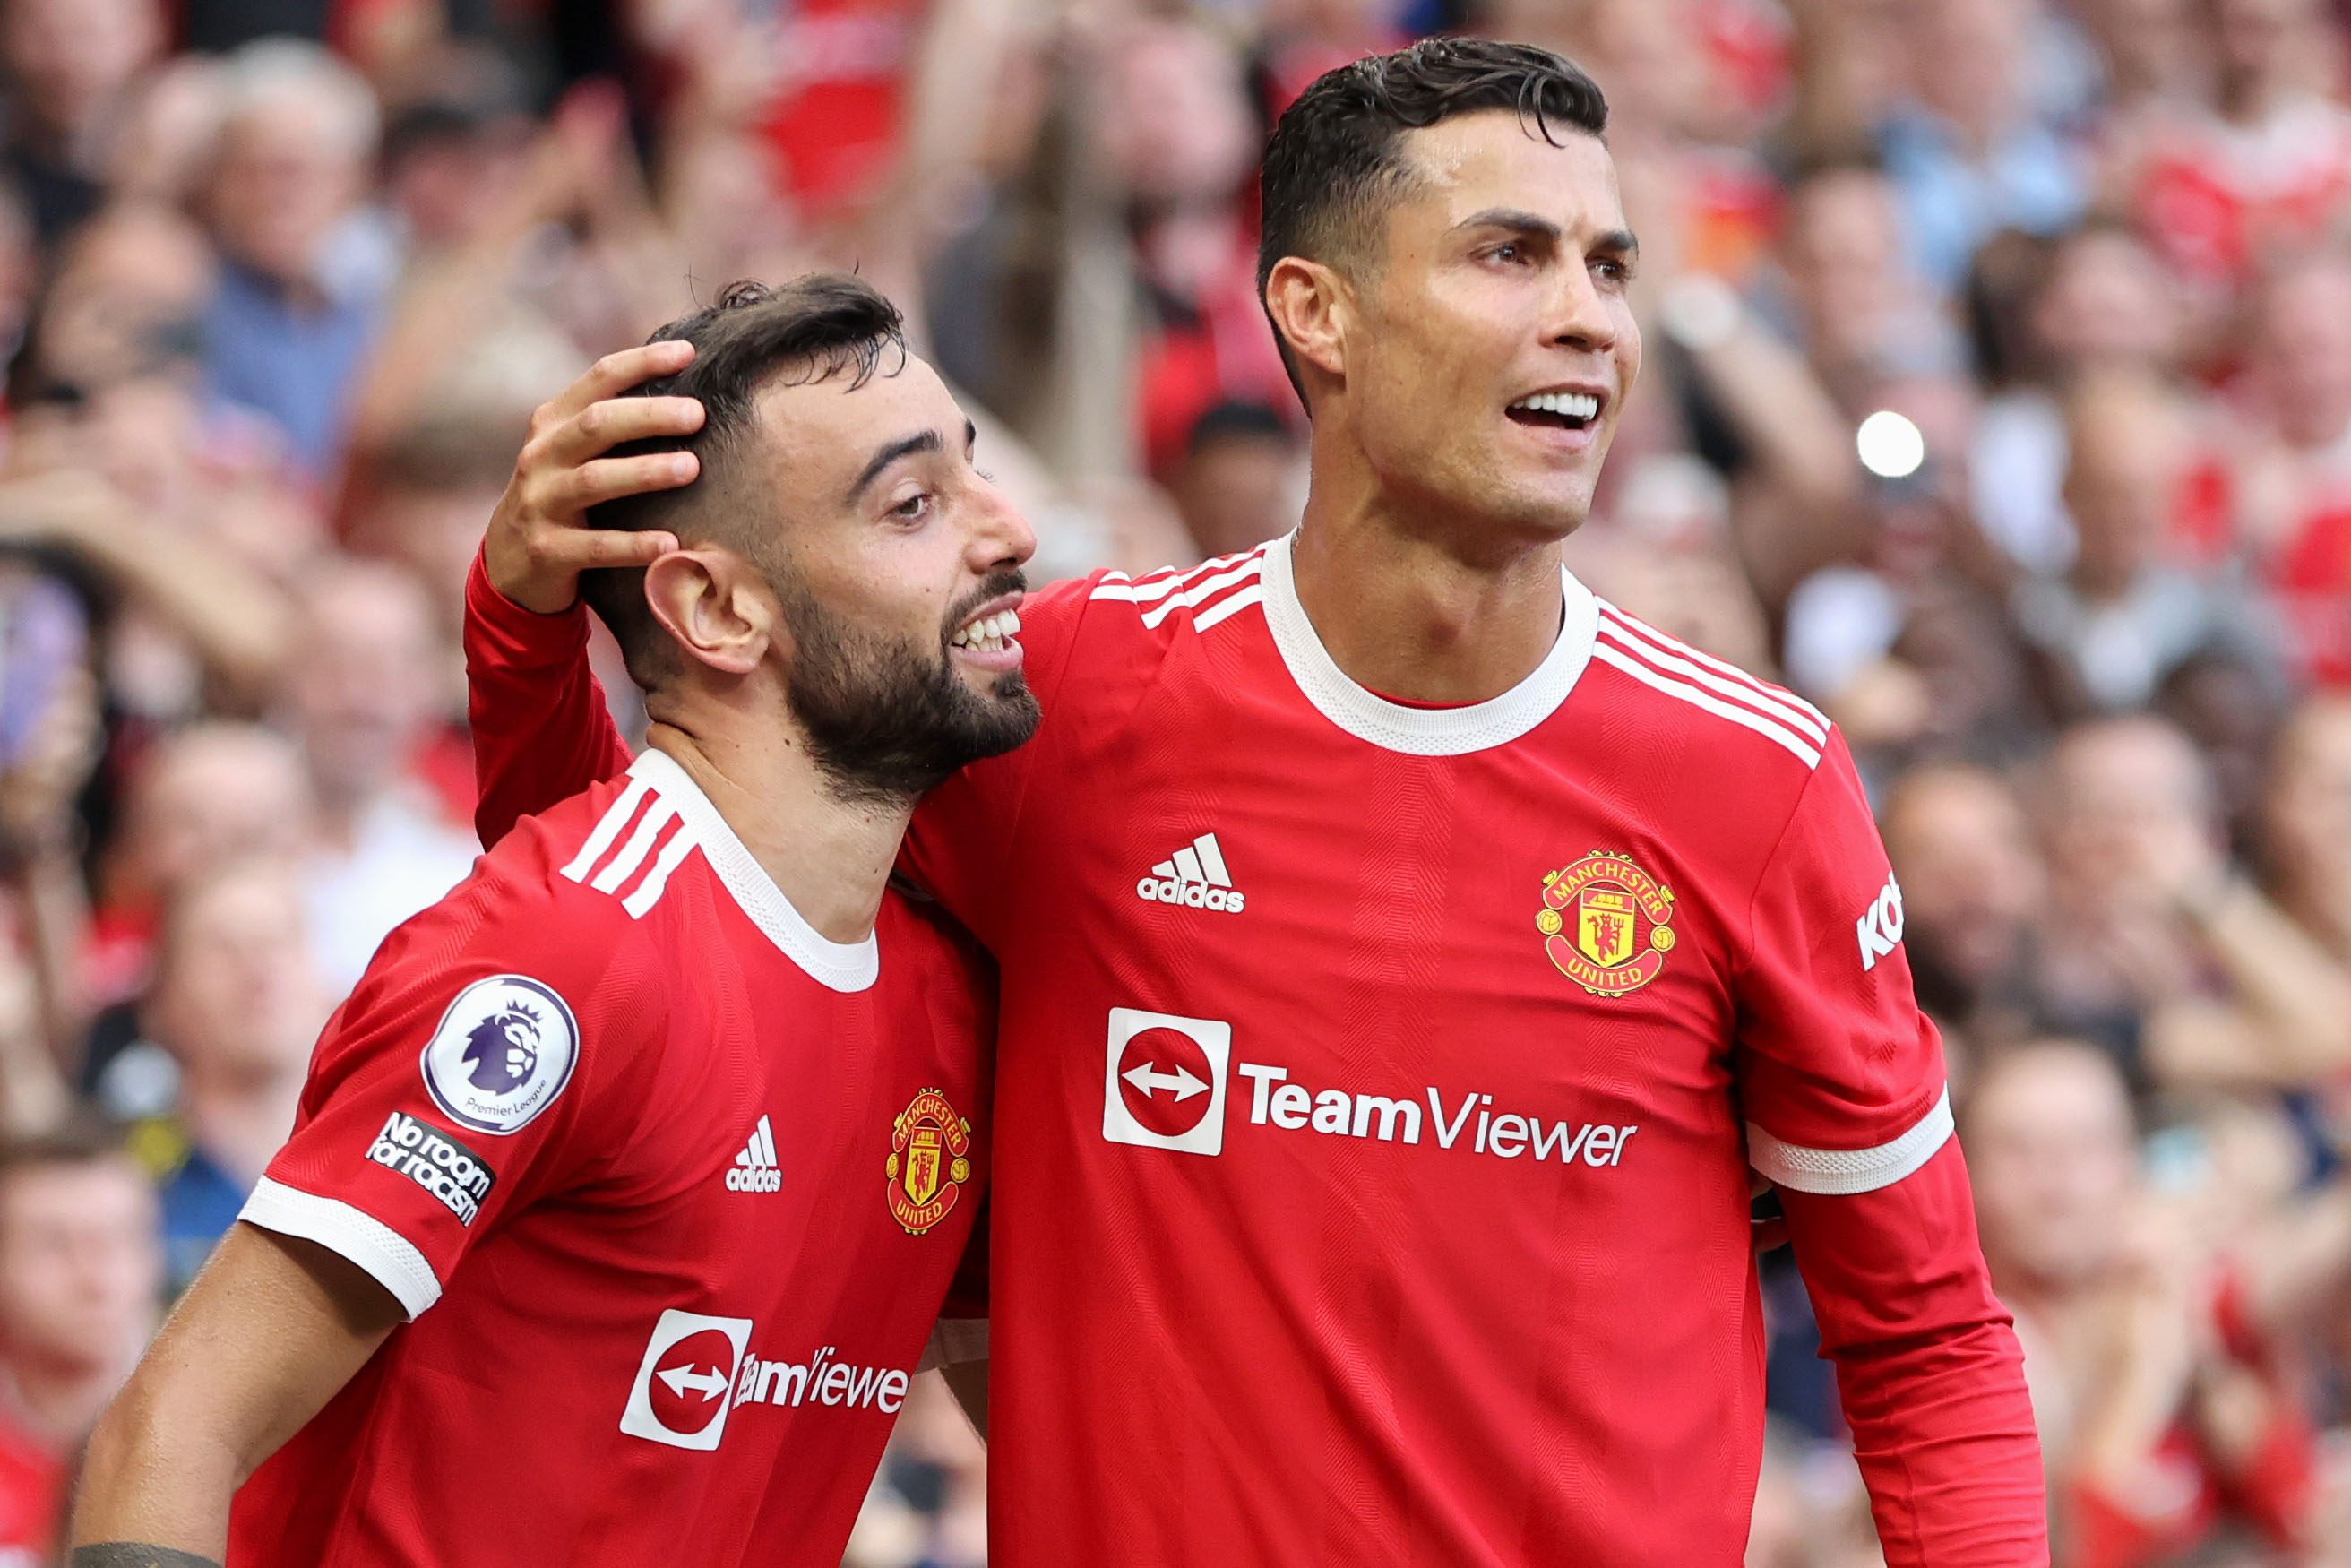 Ronaldo leaving Manchester United? Man United says ‘he is not for SALE’, will Cristiano Ronaldo turn up for training session on Monday? Follow LIVE UPDATES